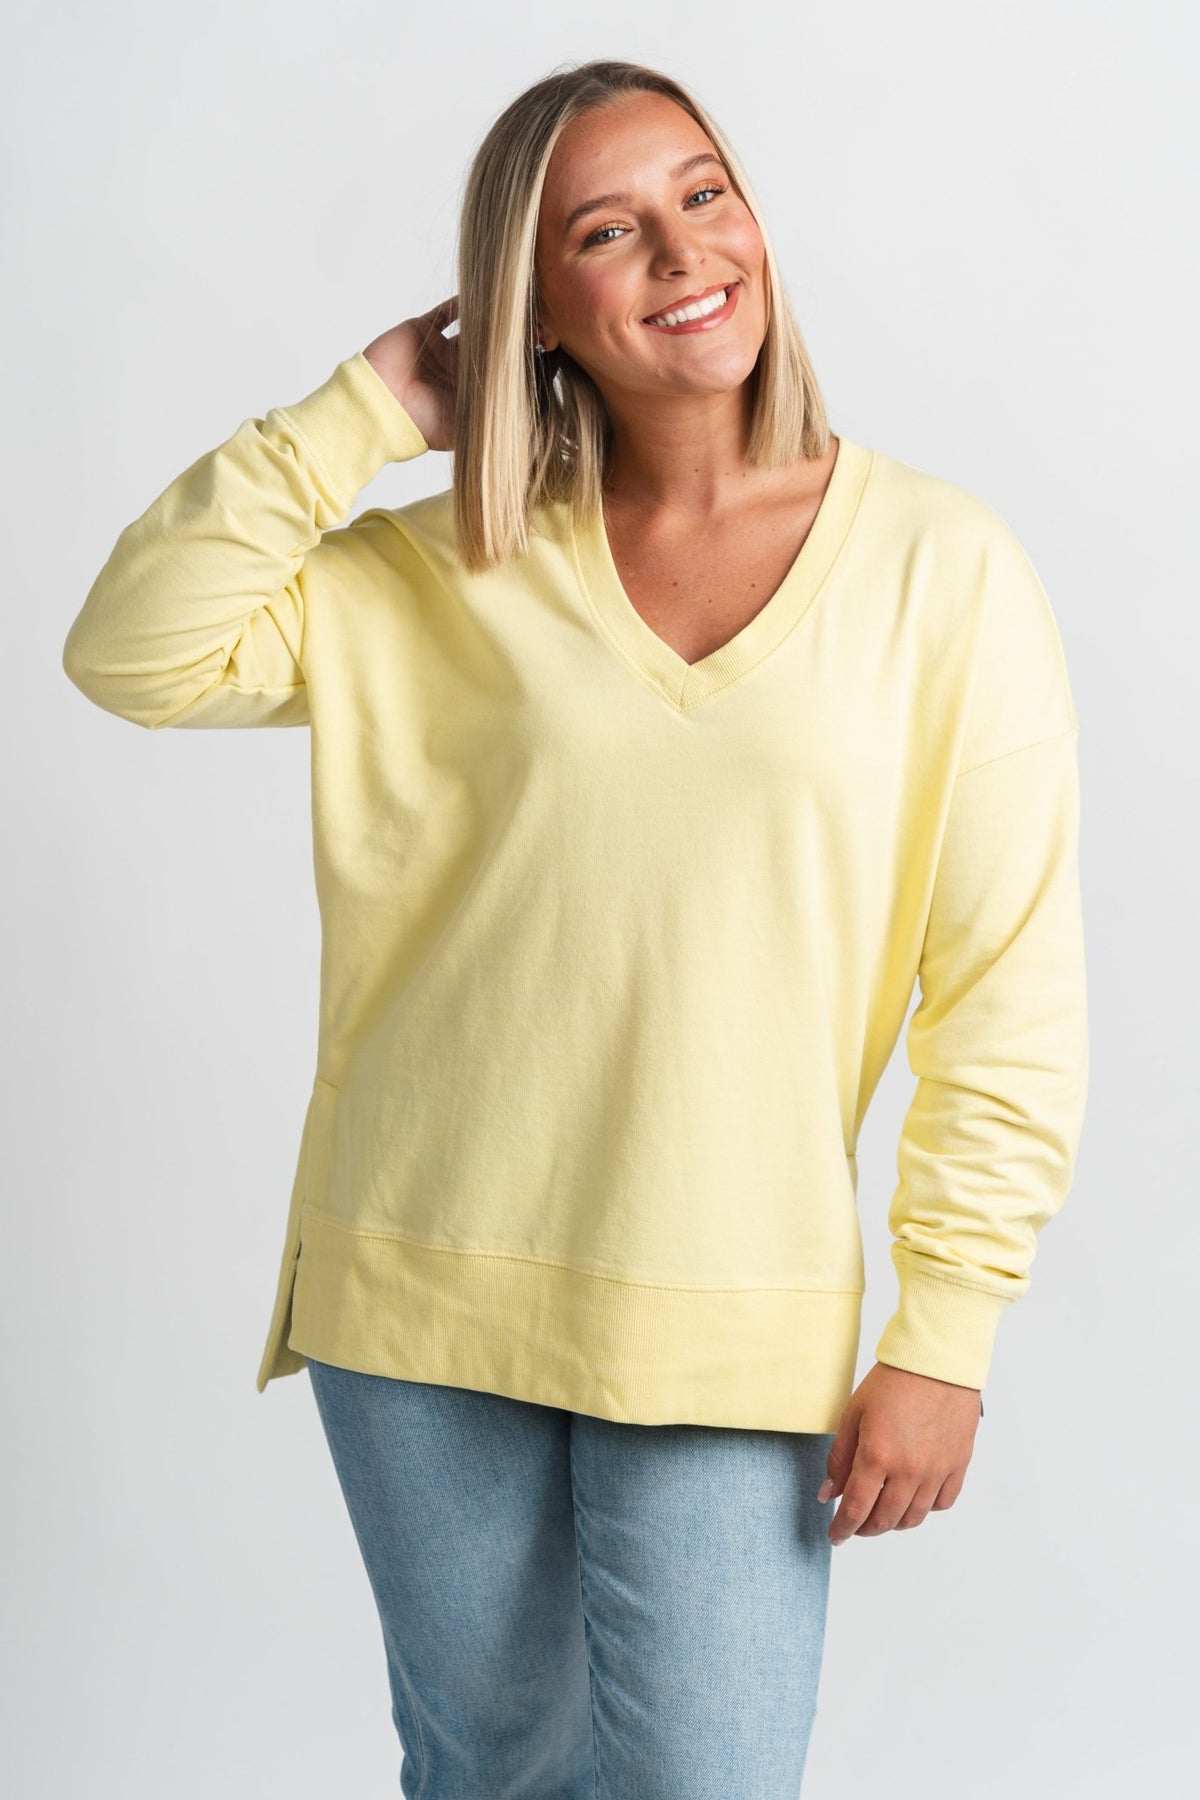 Z Supply modern v-neck weekender limoncello - Z Supply Top - Z Supply Tops, Dresses, Tanks, Tees, Cardigans, Joggers and Loungewear at Lush Fashion Lounge